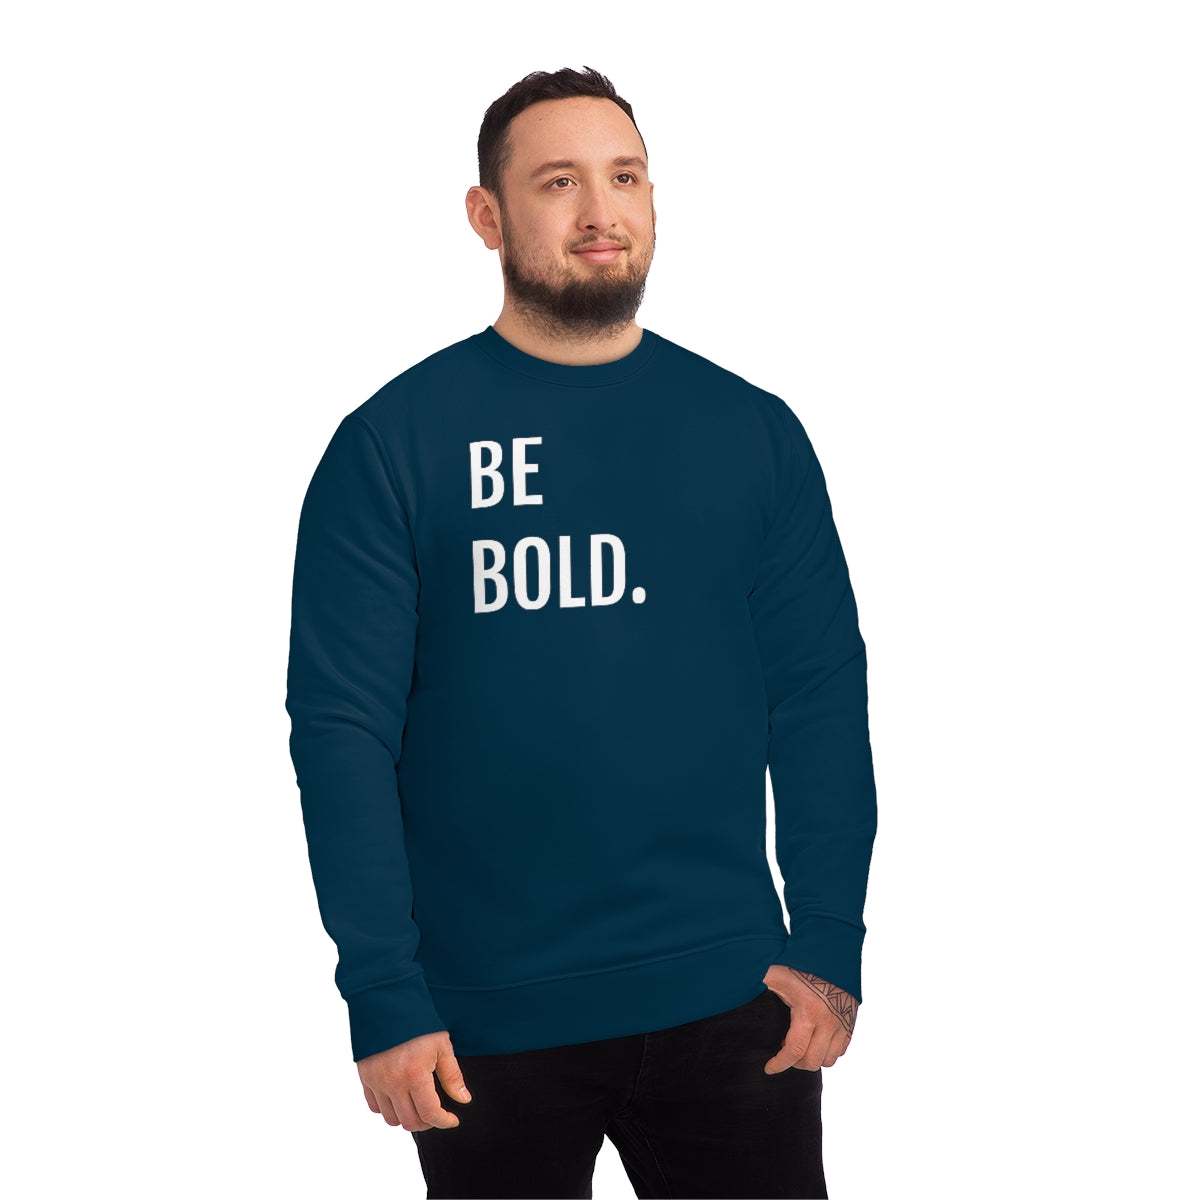 BE BOLD.